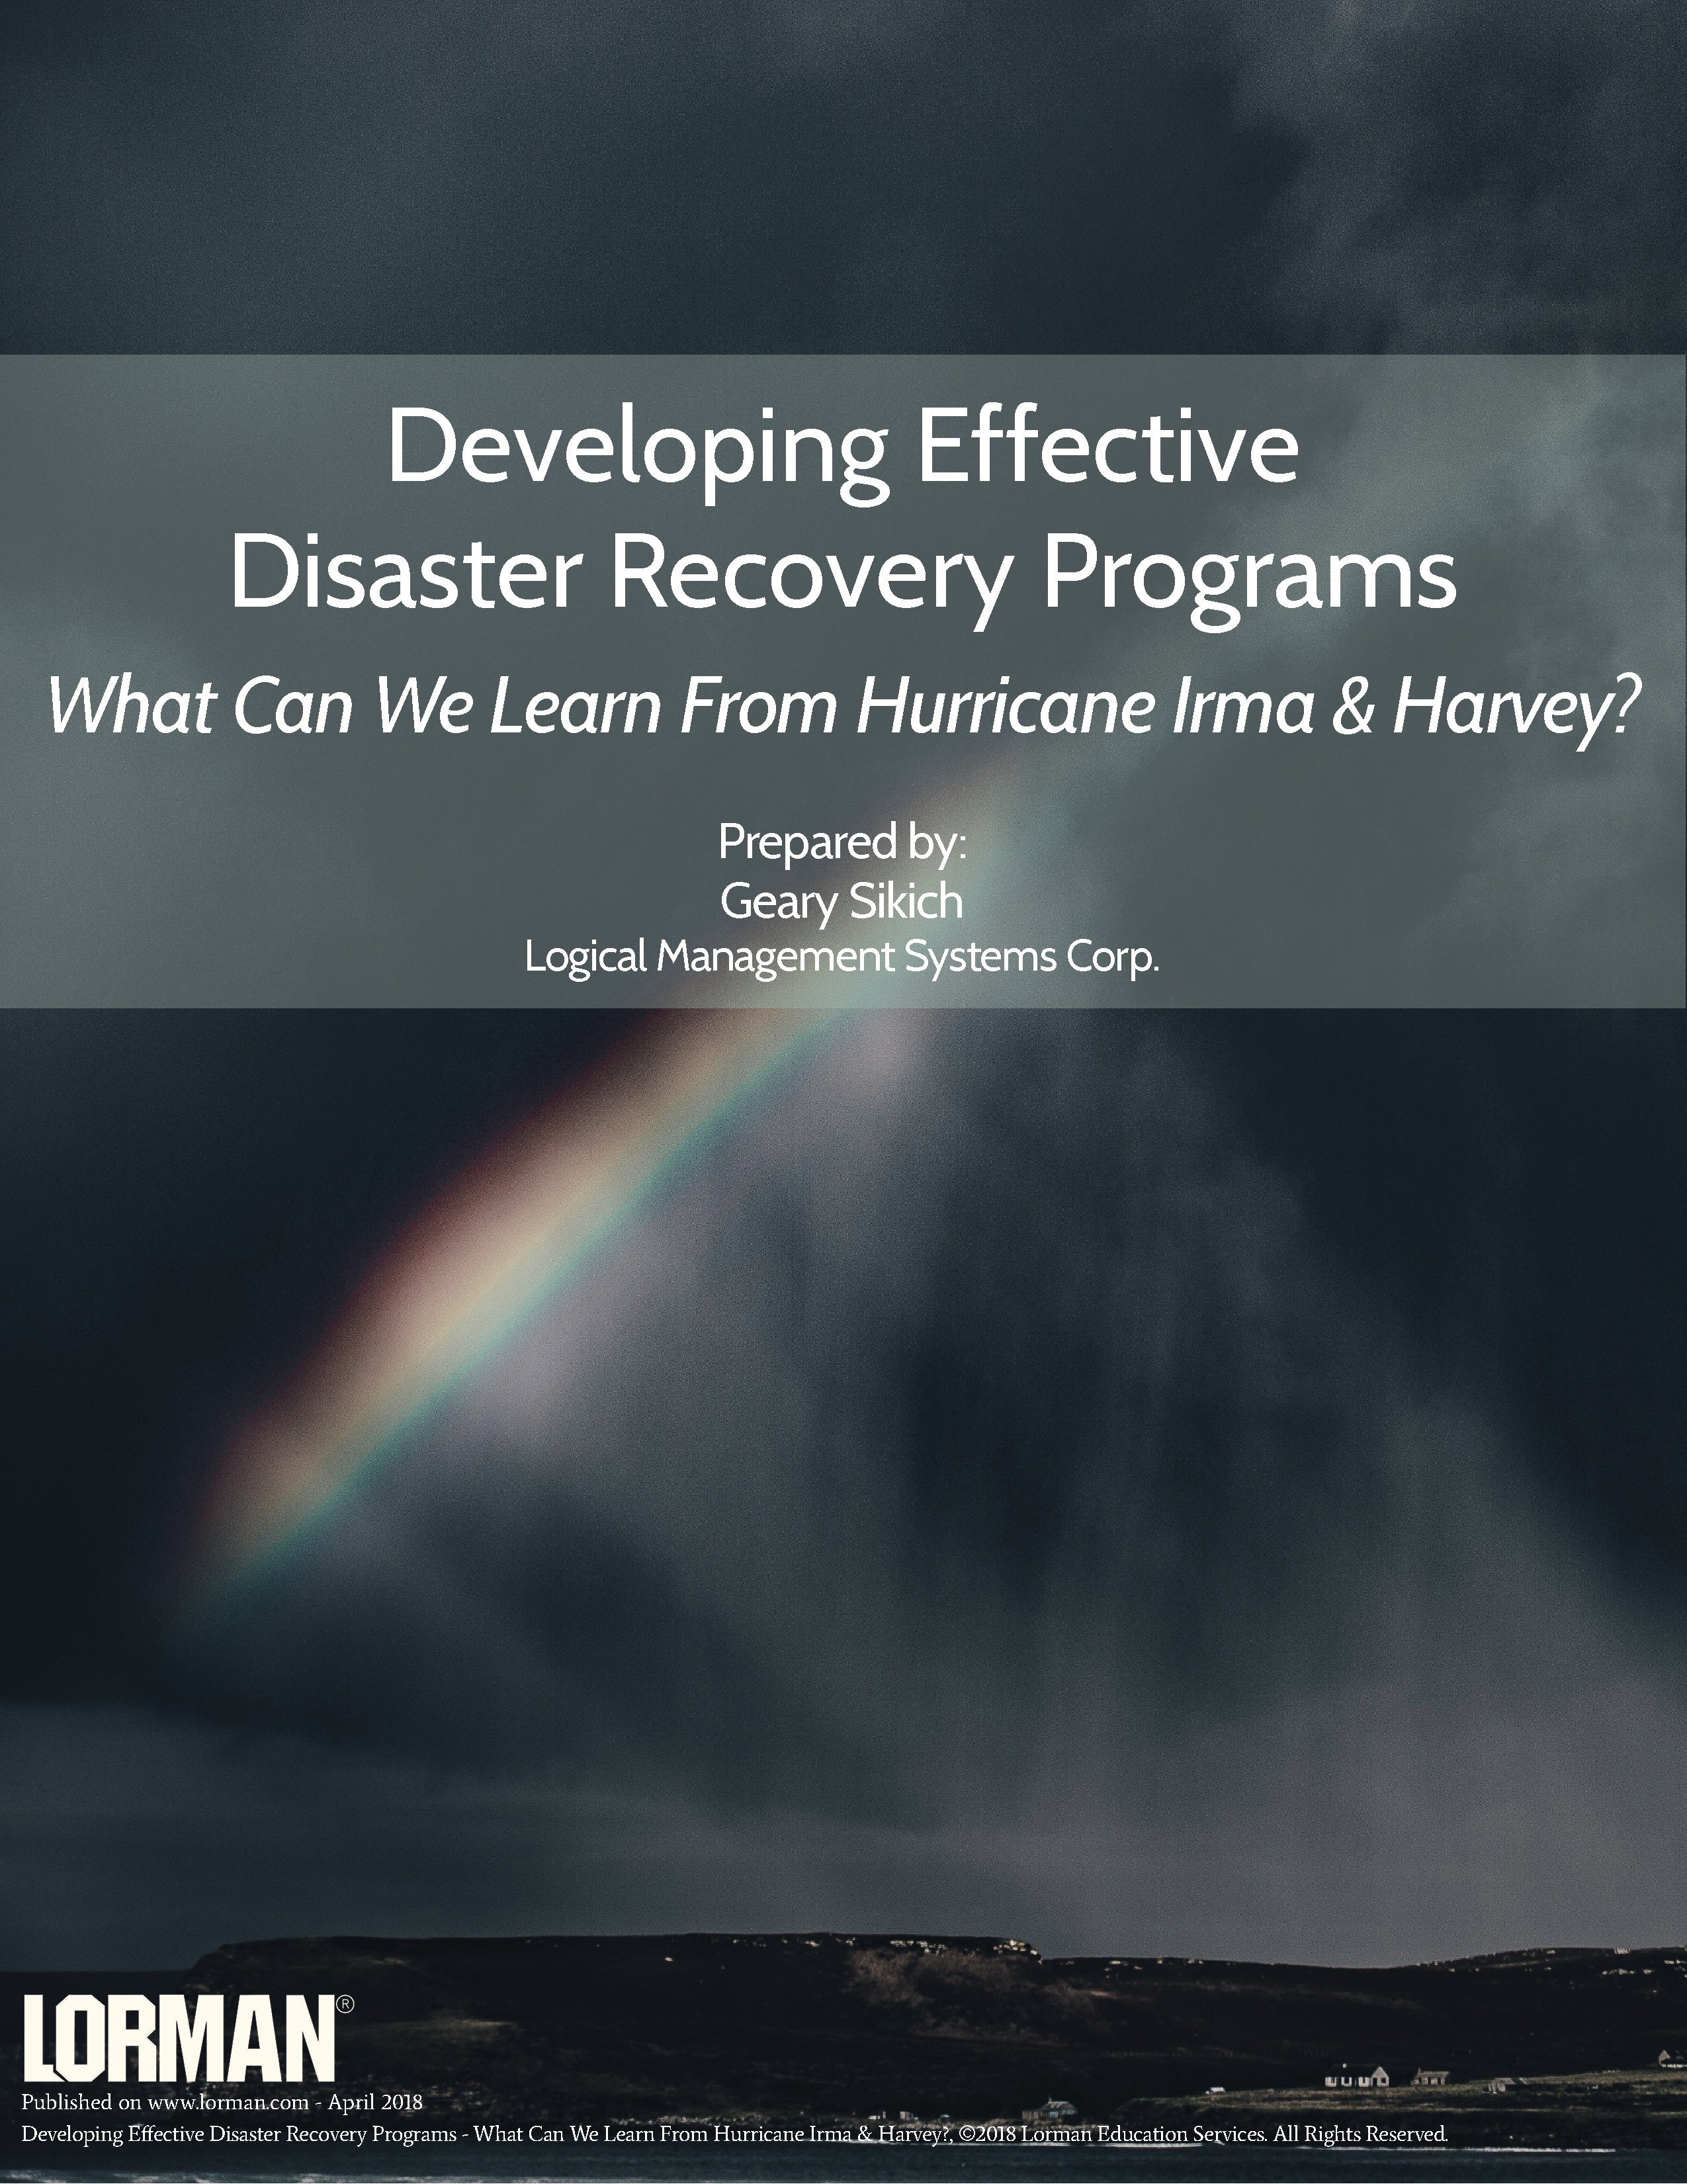 Developing Effective Disaster Recovery Programs - What Can We Learn From Hurricane Irma and Harvey?